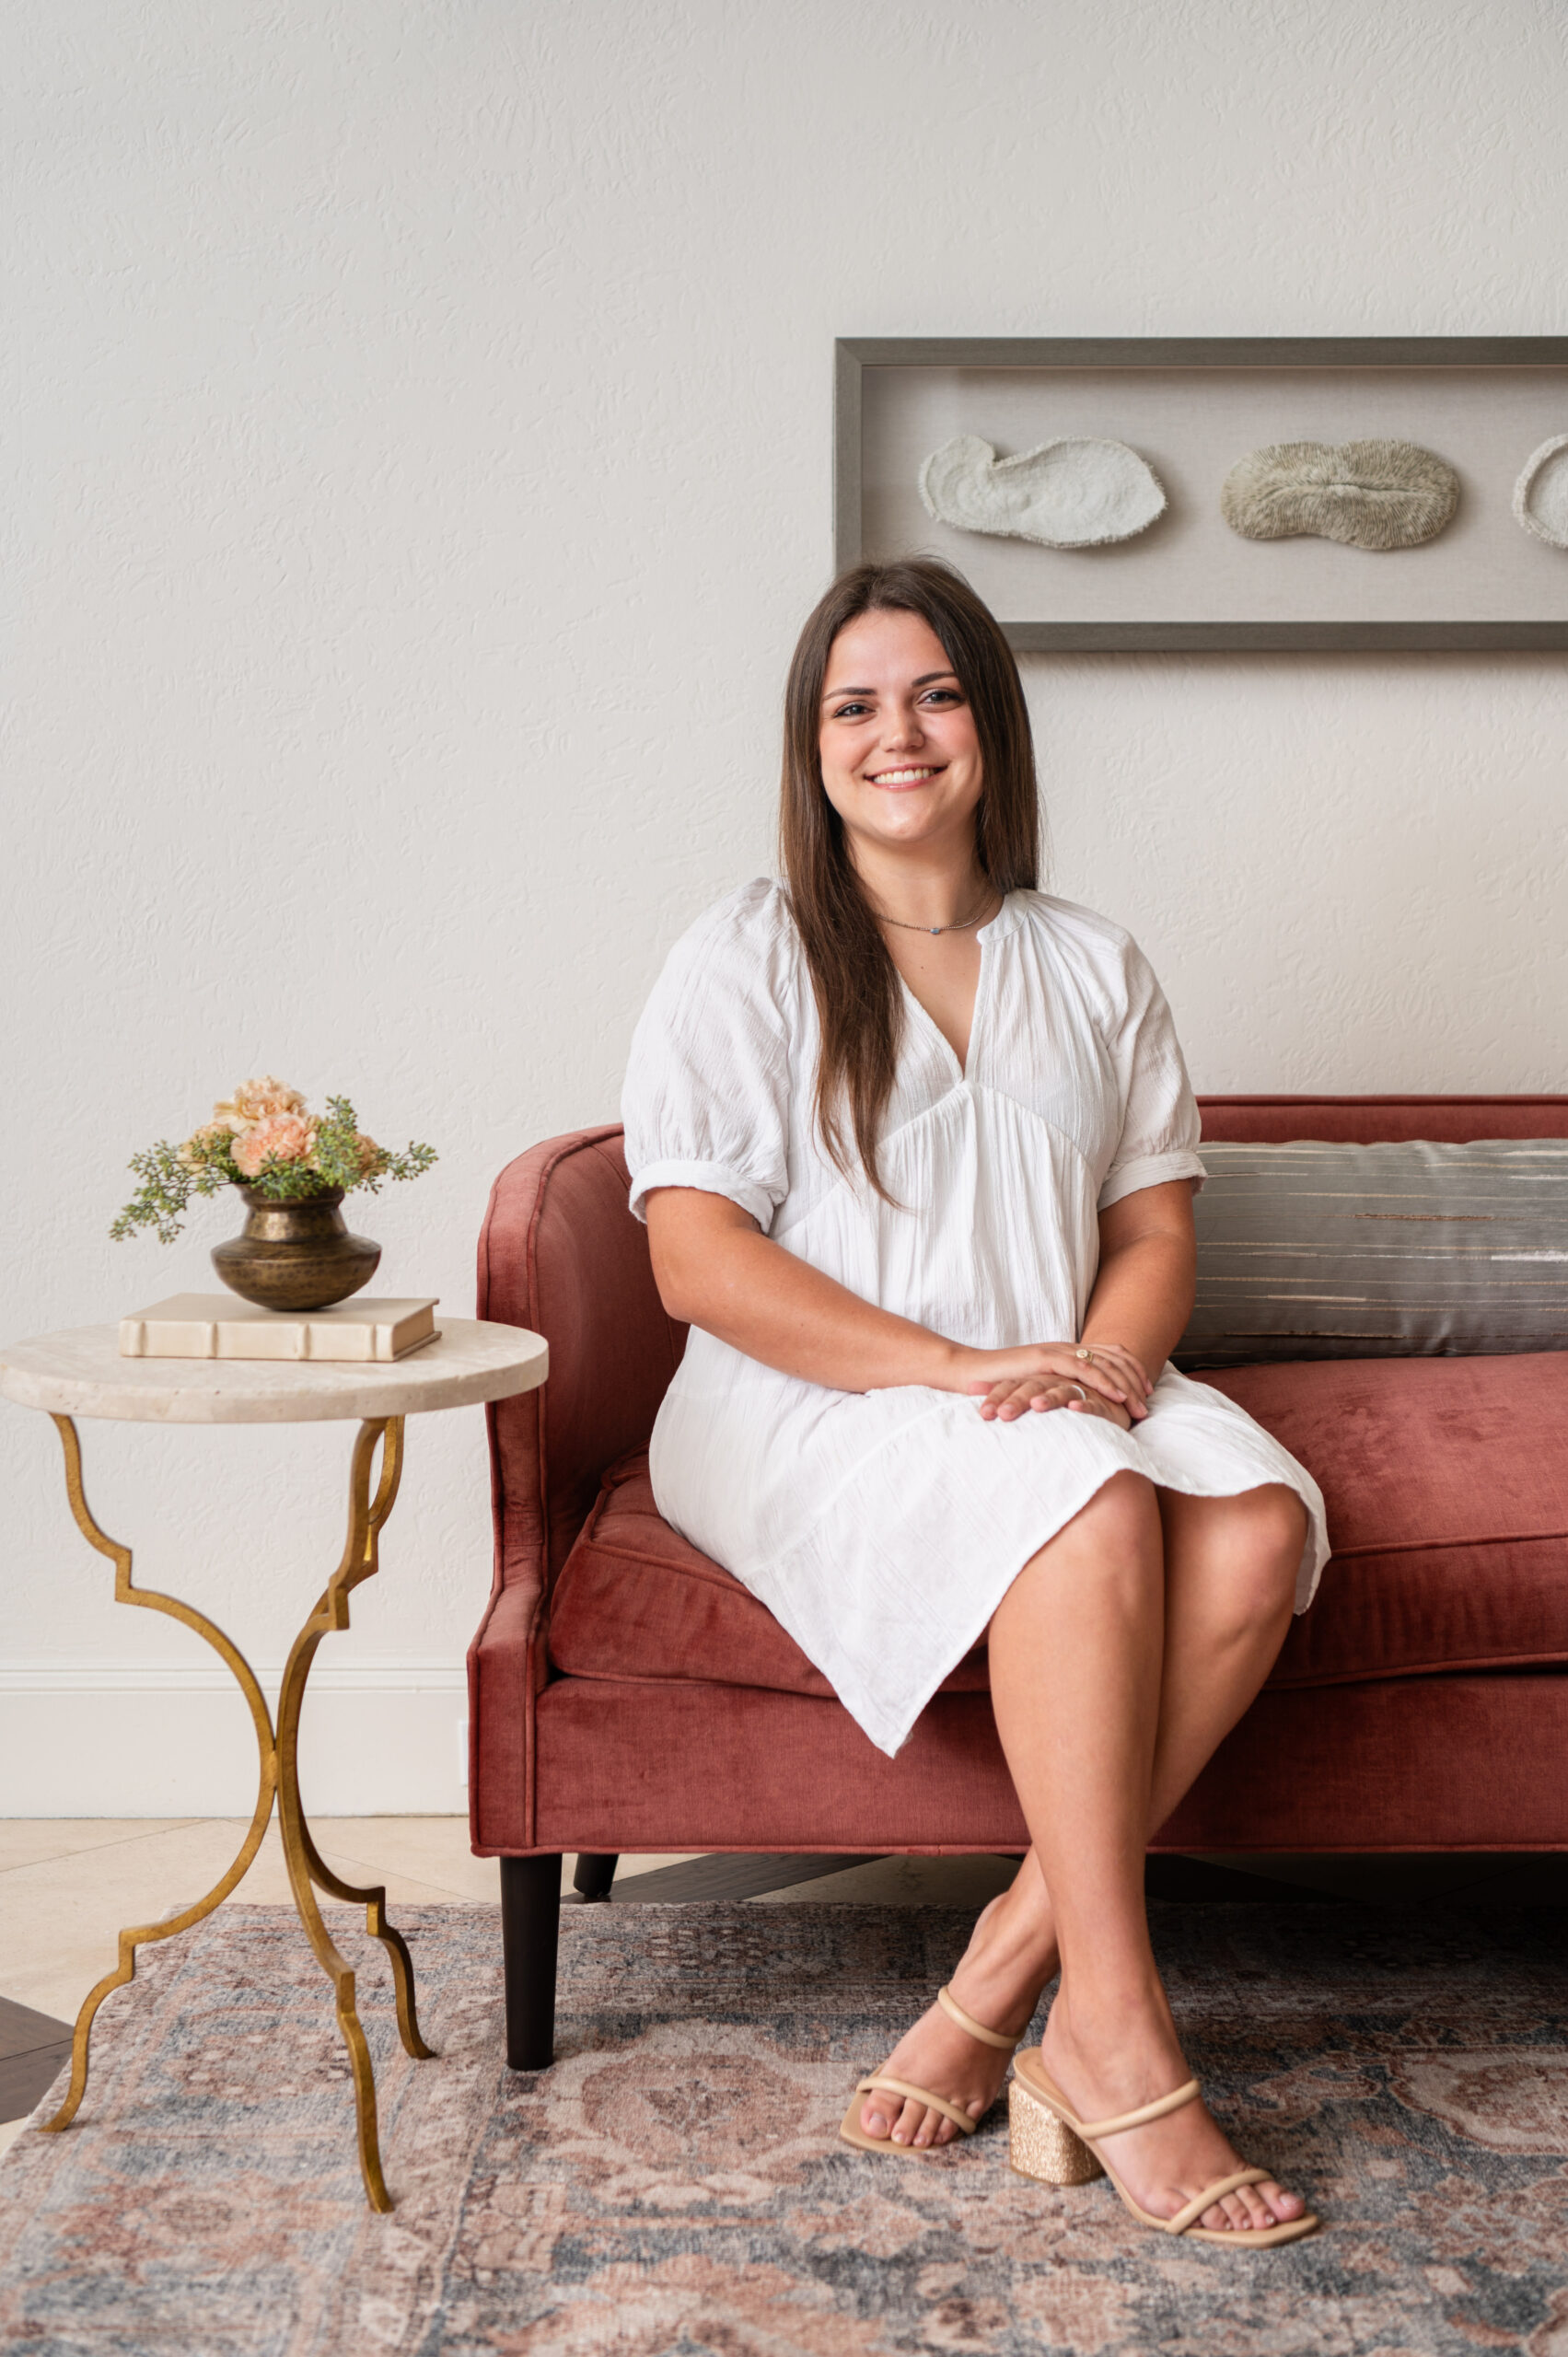 Interior design branding photo of a woman sitting on a red velvet couch